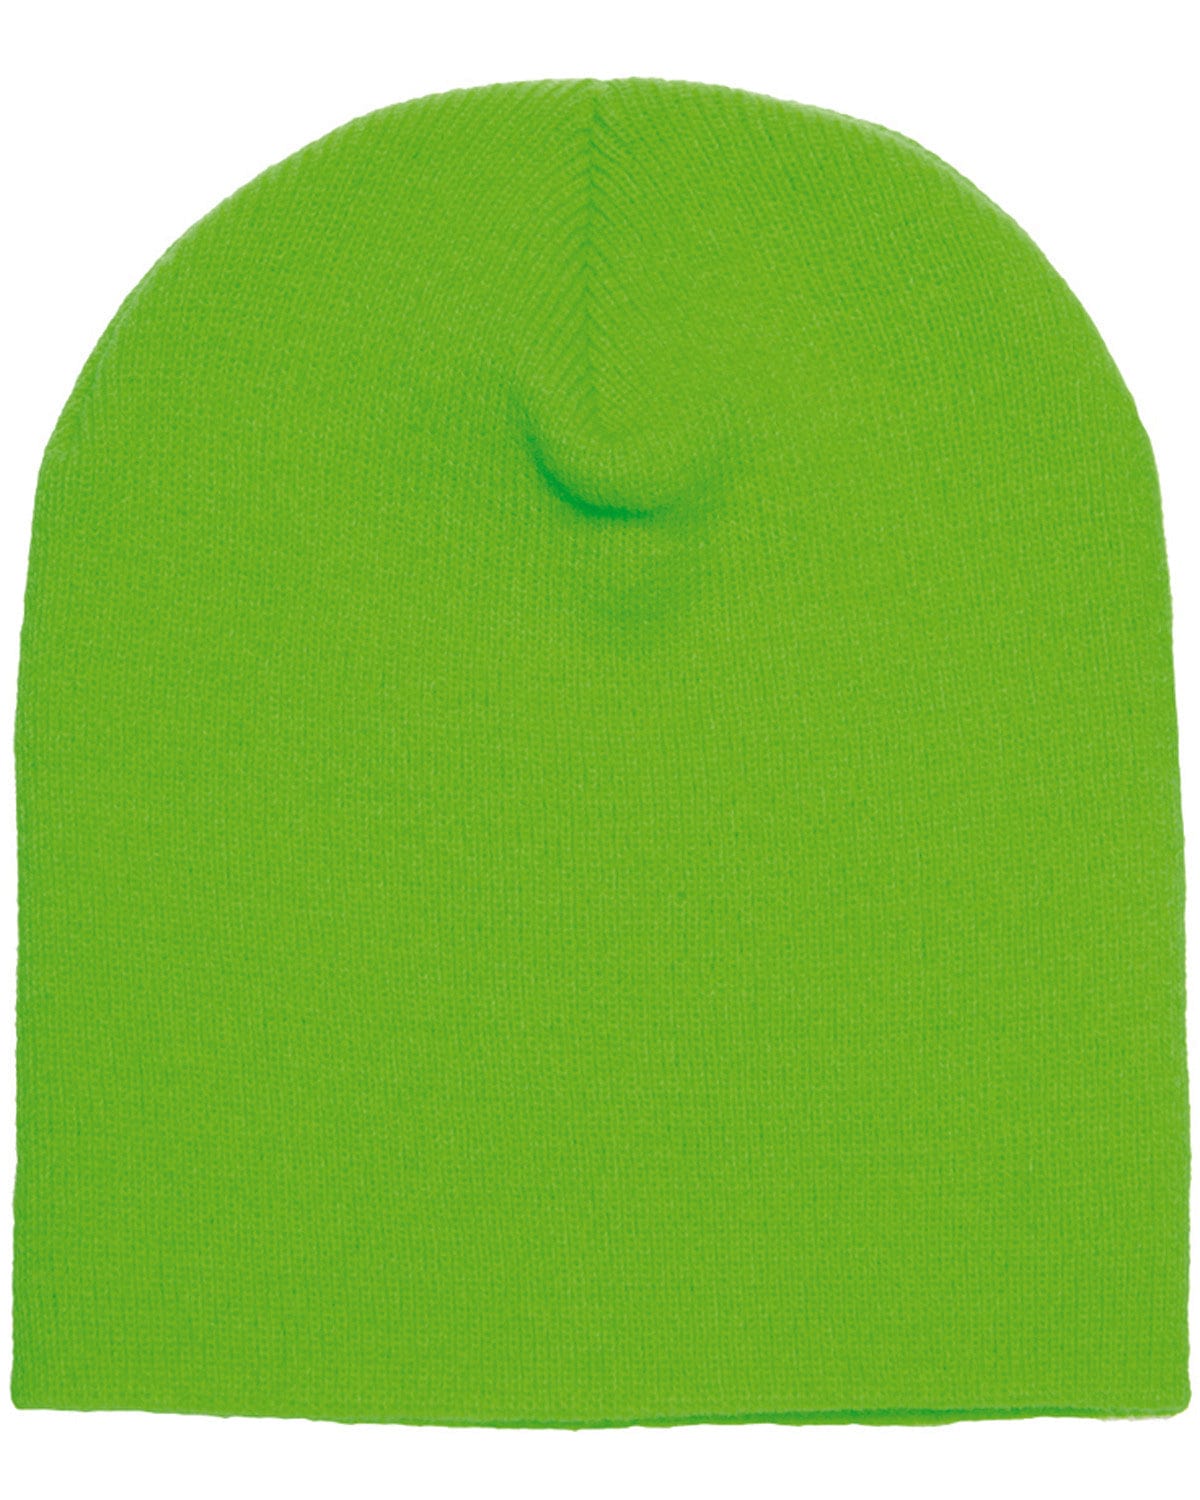 Knit Beanie Yupoong Adult 1500: